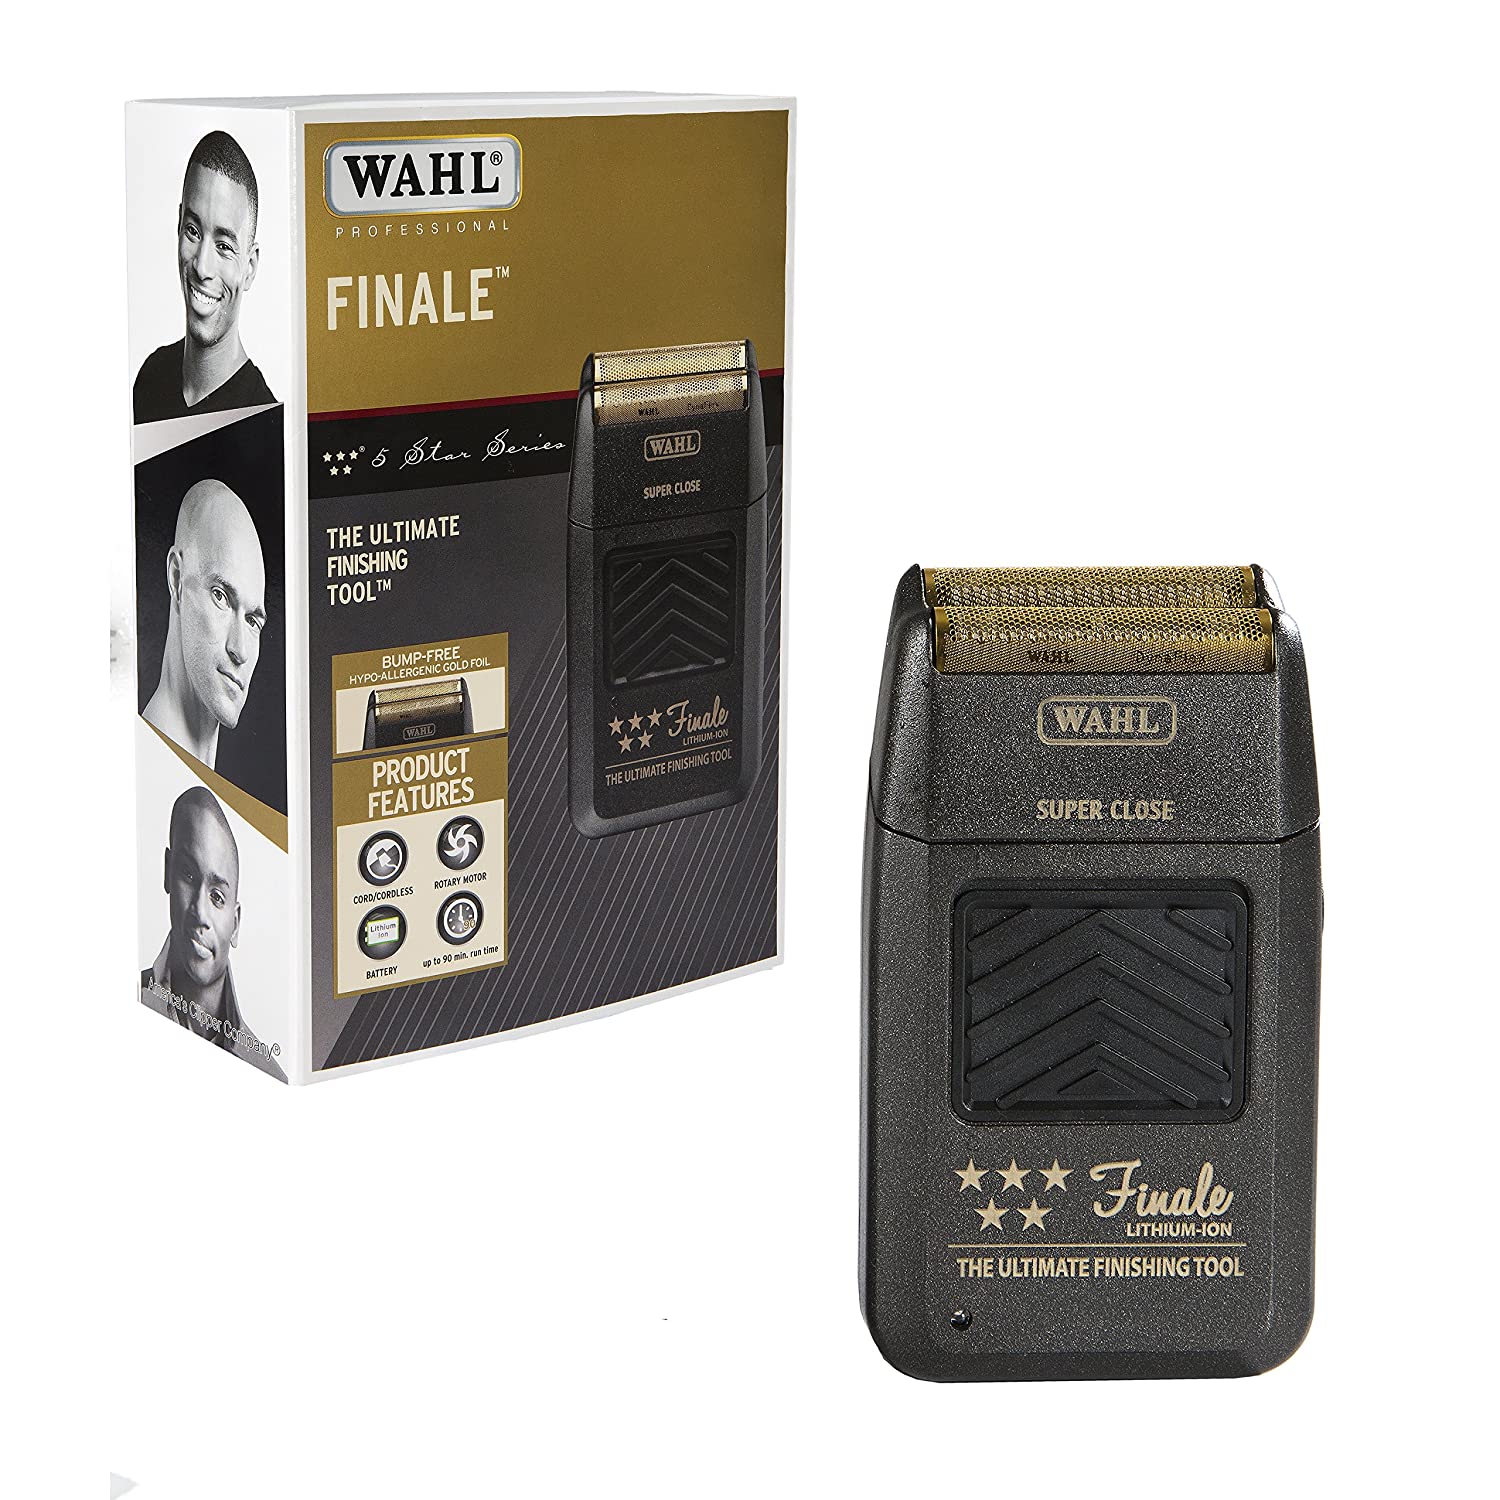 Wahl Professional 5 Star Finale Shaver